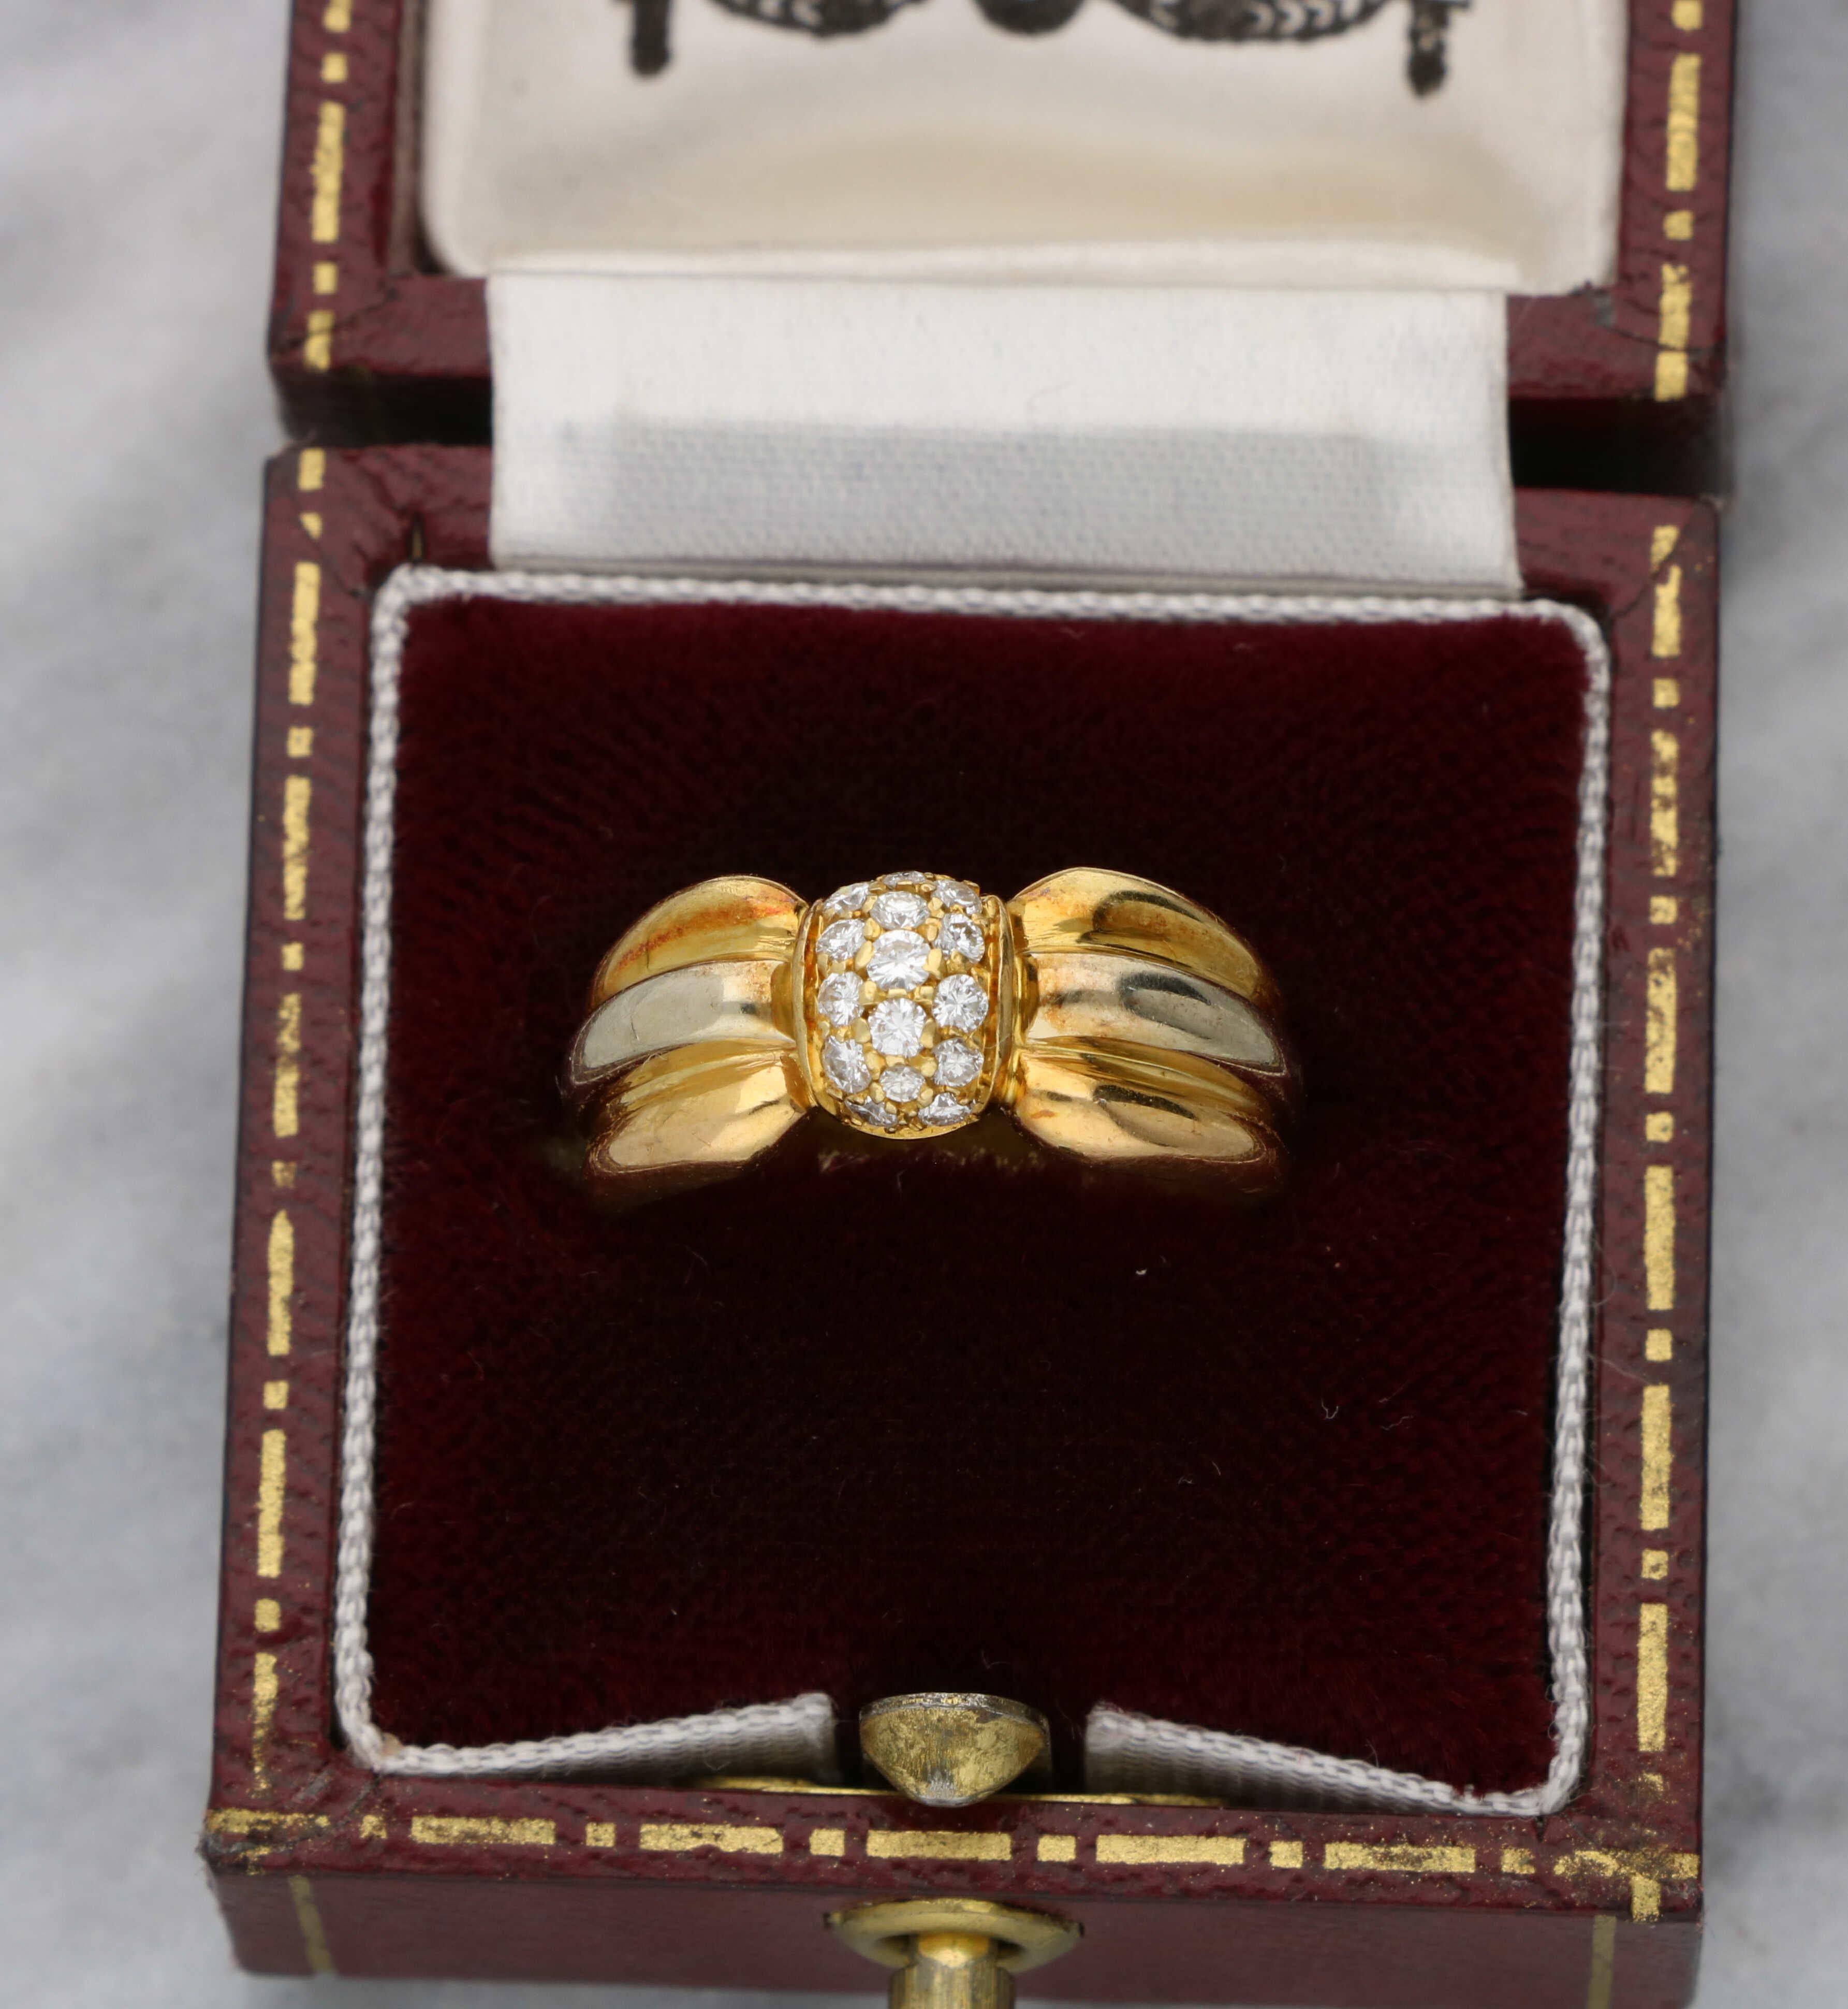 A lovely 18ct yellow and white gold diamond-set signed Cartier ring. The diamond-set centre measures 7mm and is set with estimated 0.20ct F/G VS. The band measures 8mm wide. and weighs 5.3 grams. This ring is a UK size L / US size 5 3/4. 

Diamond